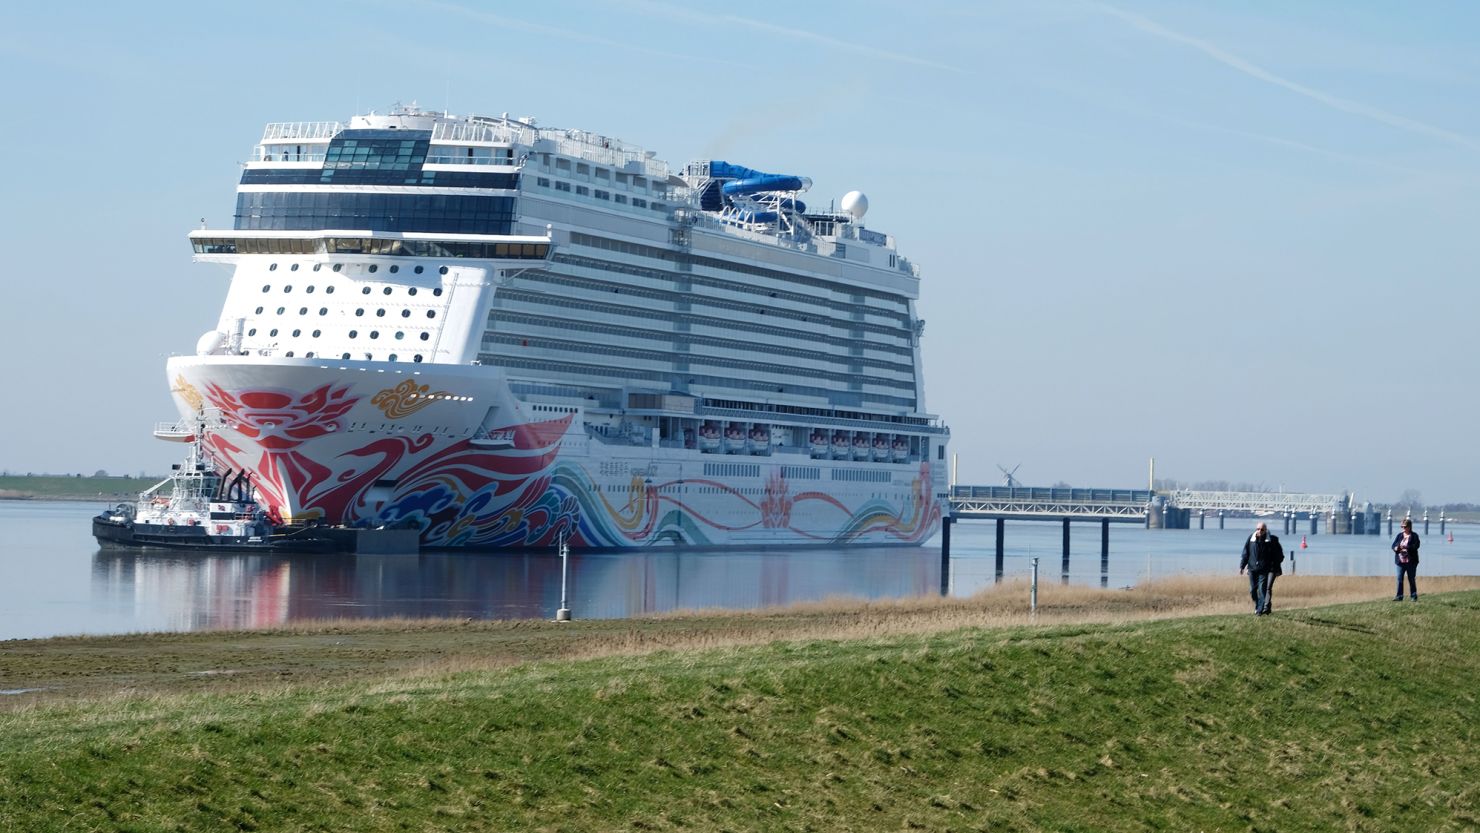 Spectators look on as the "Norwegian Joy" cruise ship, previously named "Norwegian Bliss", makes its way over the river Ems near Emden, northern Germany, on March 27, 2017.
The ship of the Norwegian Cruise Line, that was built at the Meyer Werft shipyard in Papenburg, northern Germany, is made ready to enter service. Final technical and nautical tests are due to be carried out during the following days on the North Sea. / AFP PHOTO / PATRIK STOLLARZ        (Photo credit should read PATRIK STOLLARZ/AFP via Getty Images)